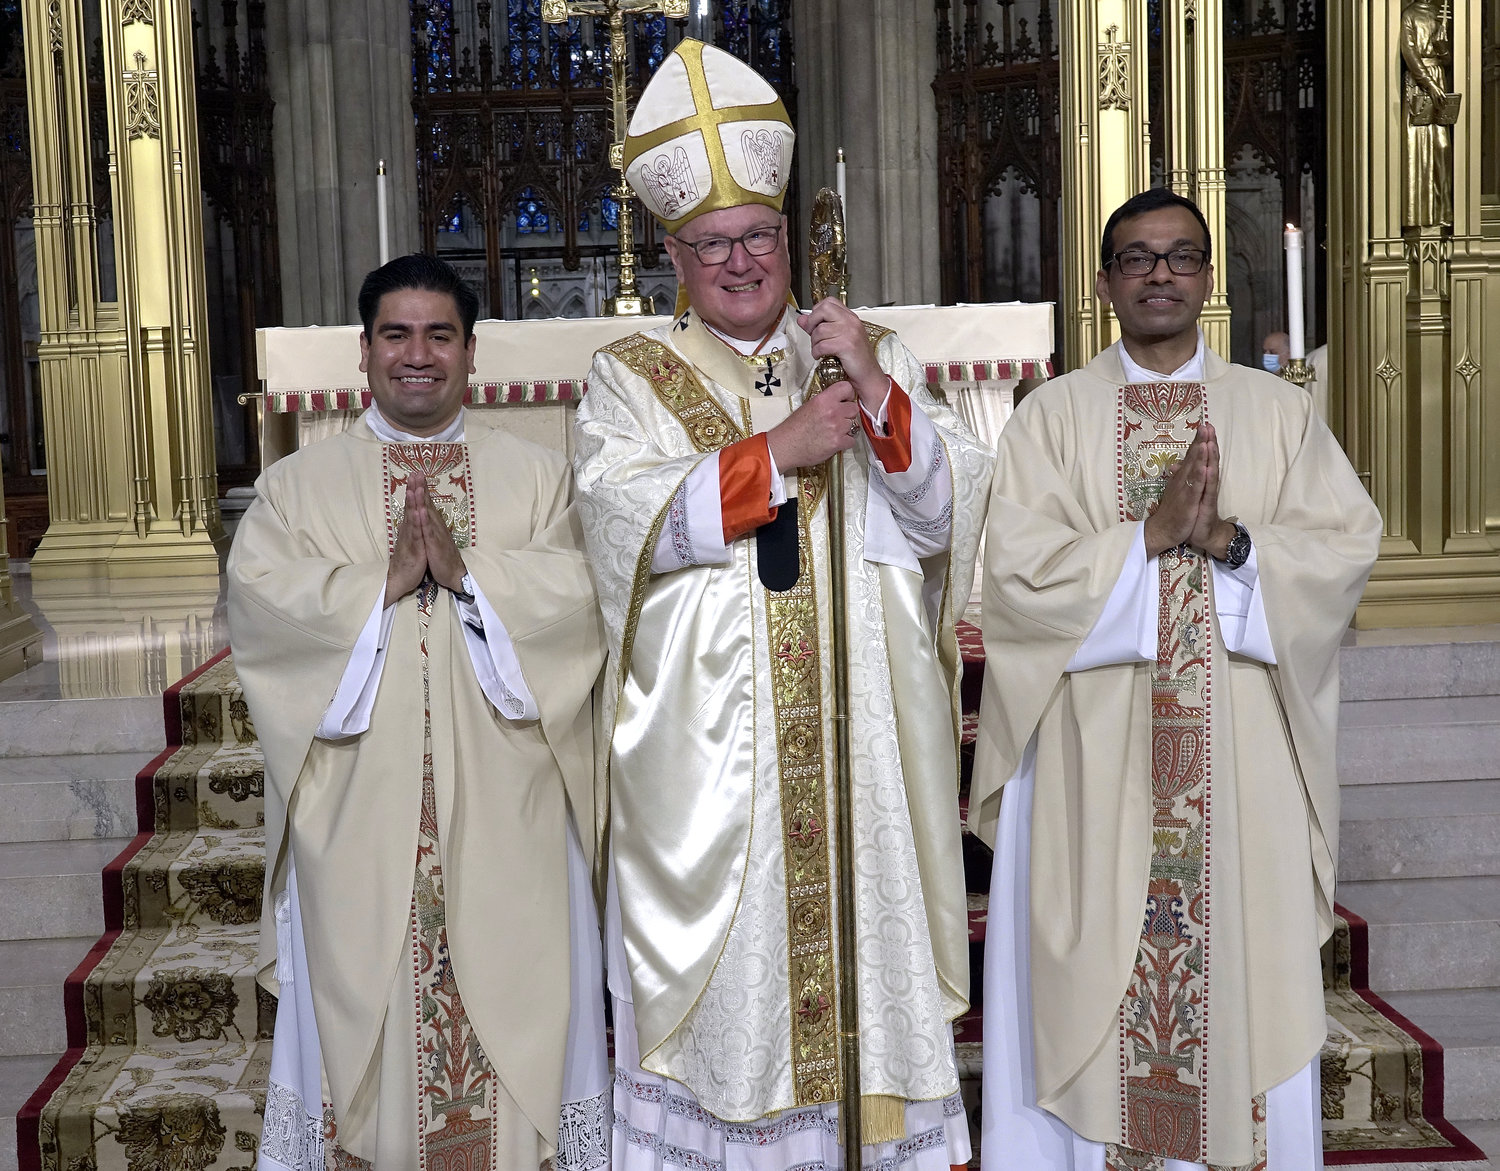 Cardinal Dolan joins Father Luis Silva and Father Roland Pereira, M.Id., after the Mass of Ordination.